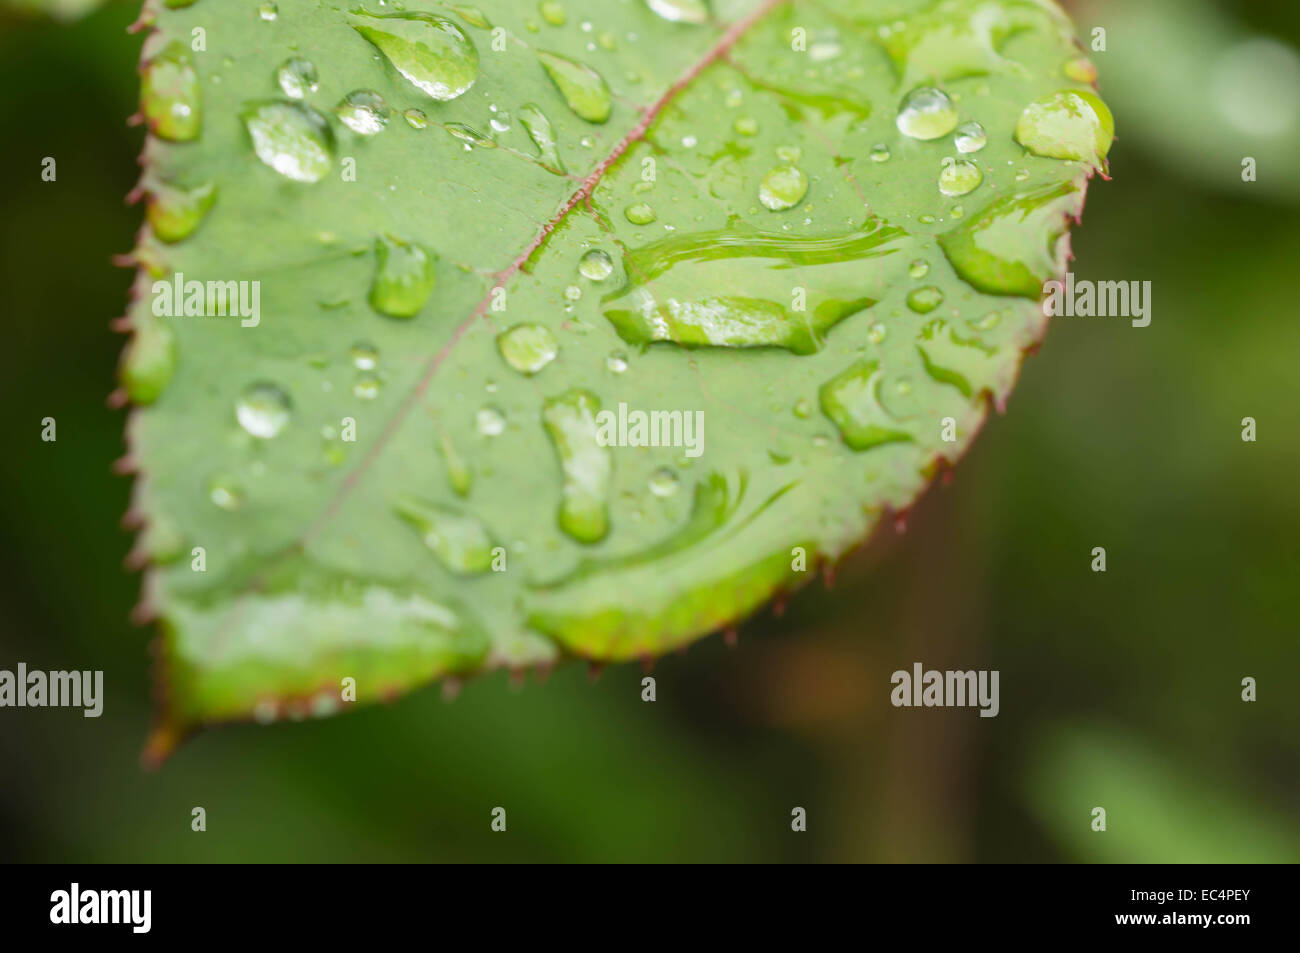 Water drops on a green leaf close up Stock Photo